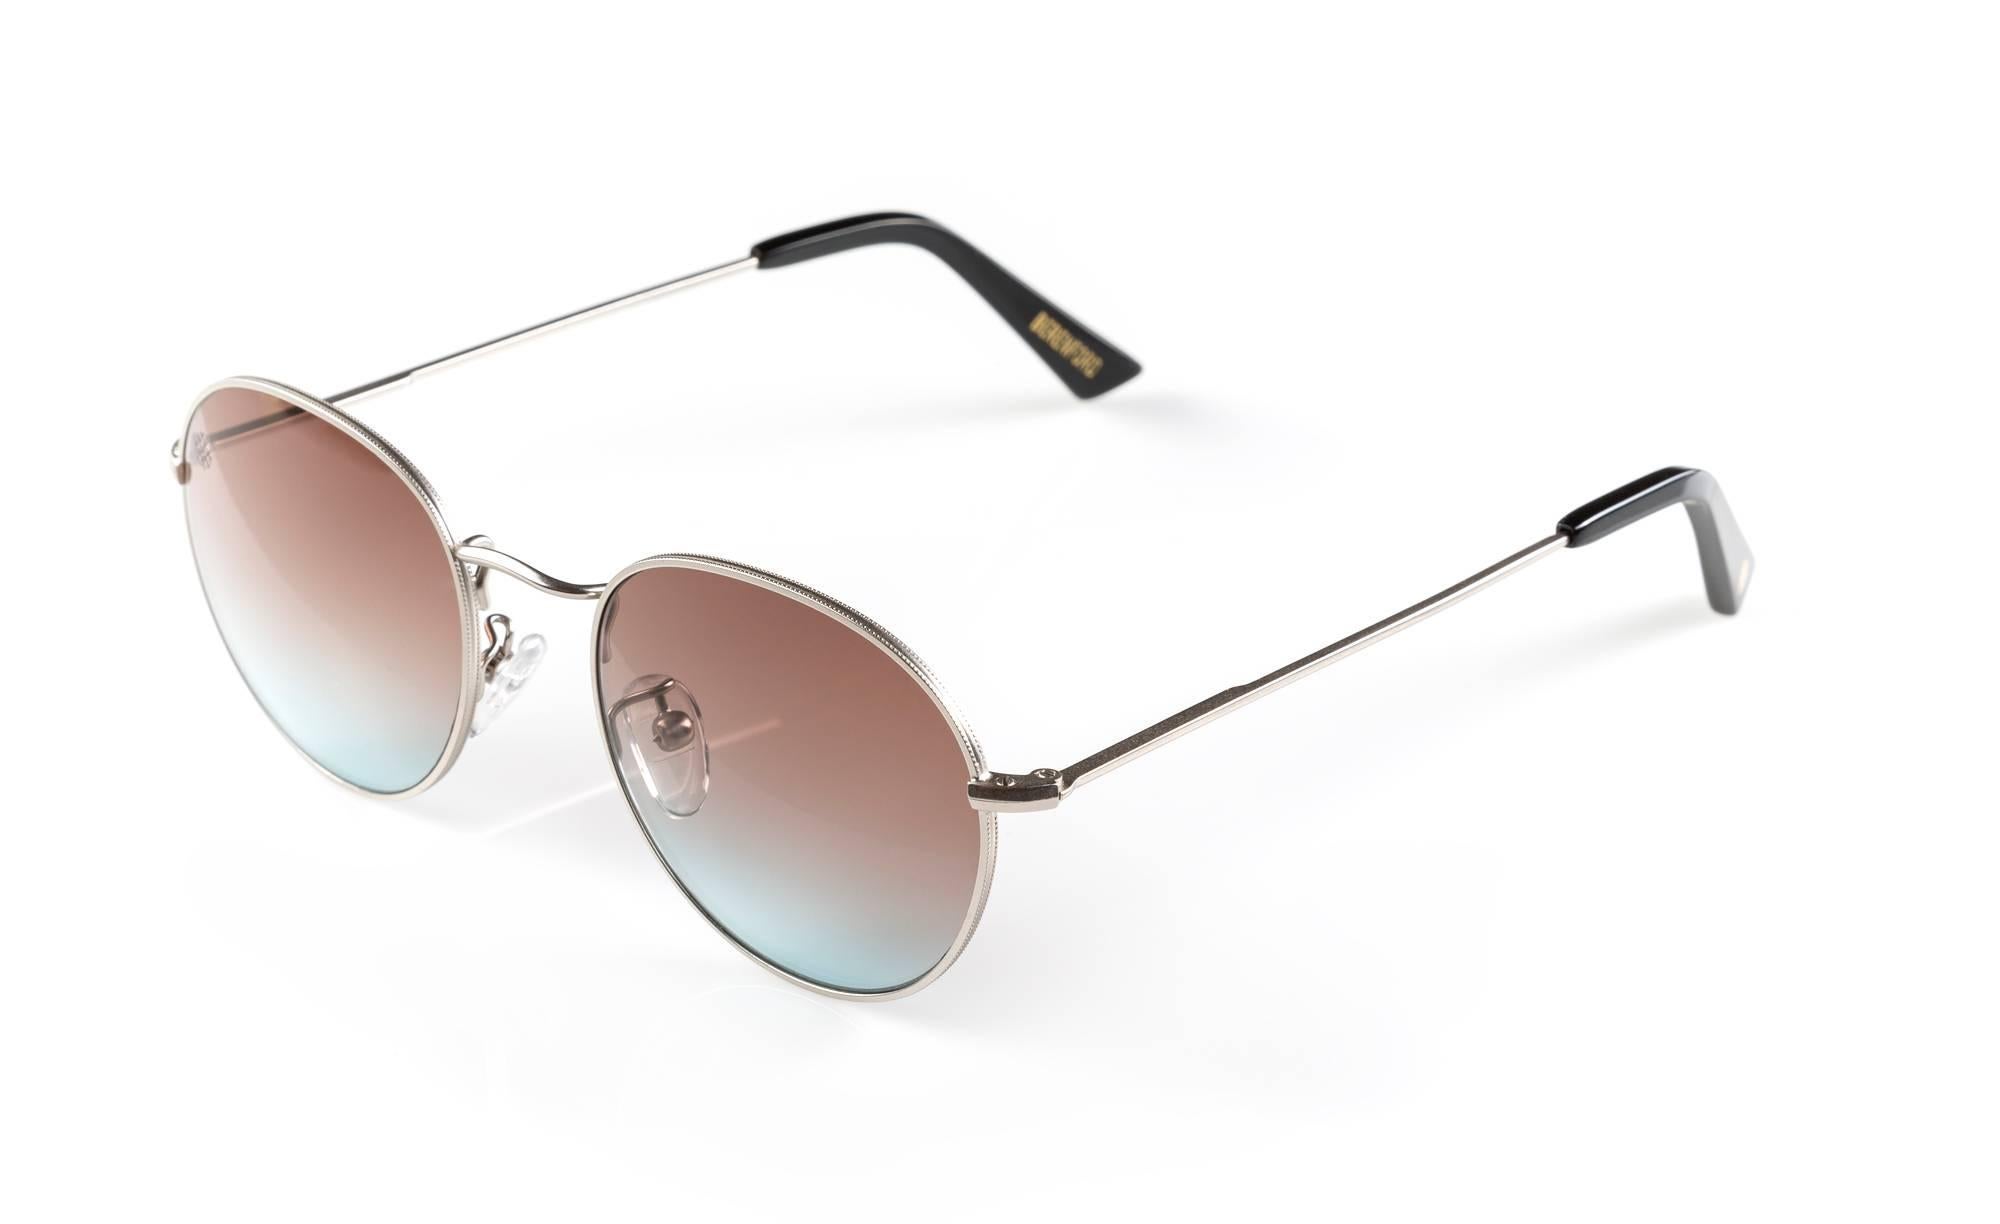 Chic and easy, London spectacle recreates the vibe of London in the 1970s. Inspired by John Lennon, this eyewear carries old-world charm and free spirit. Beautifully handcrafted by artisans in Italy.